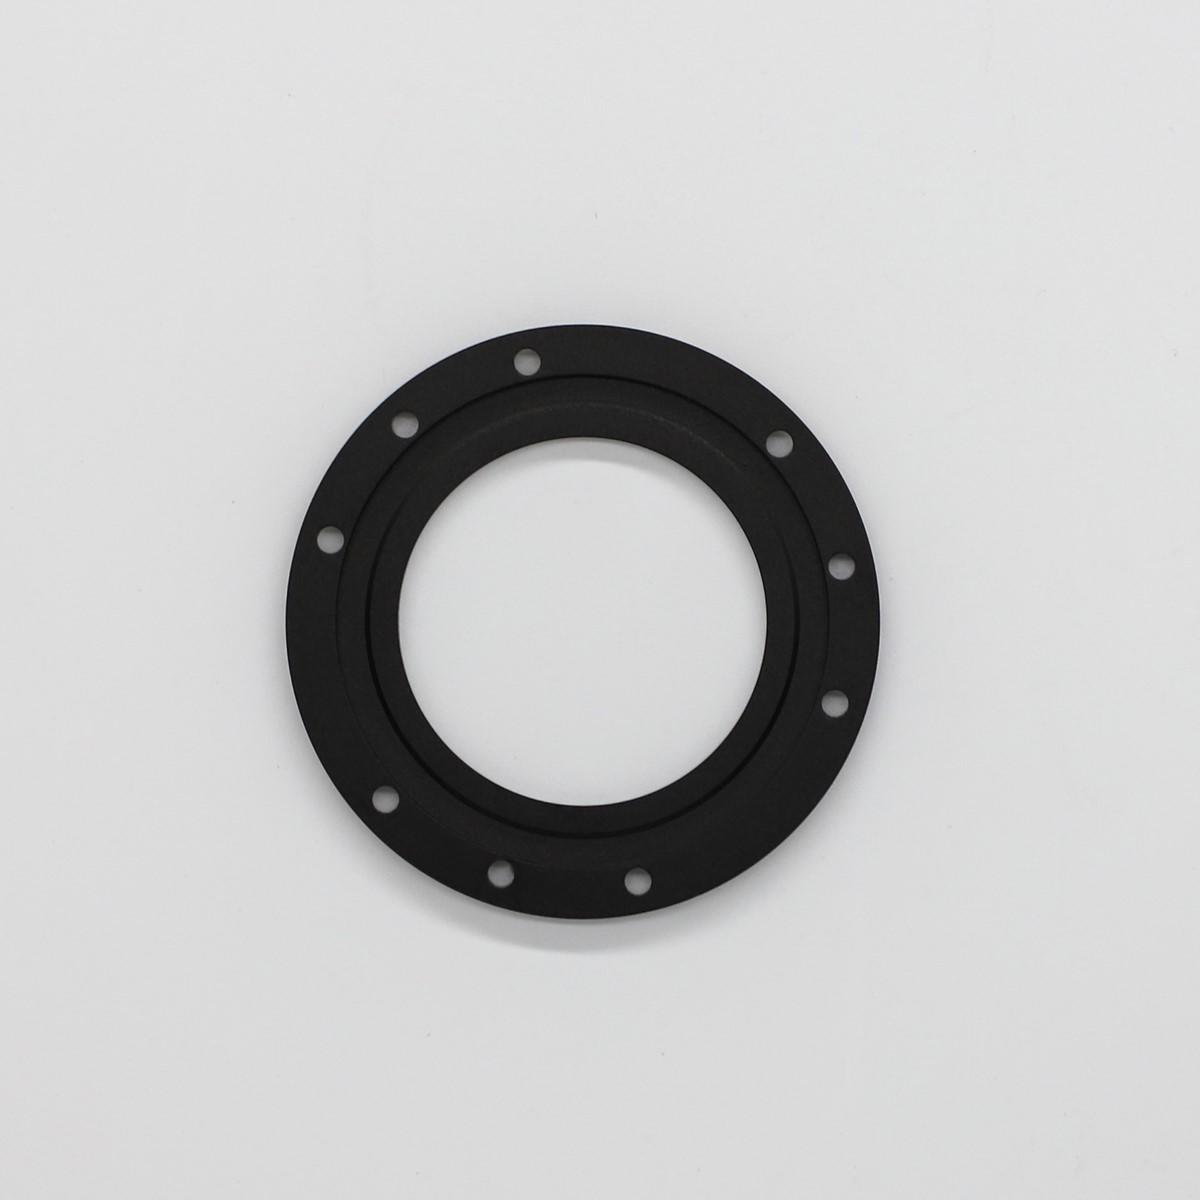 popular cnc machined lens parts housing excellent quality from top factory